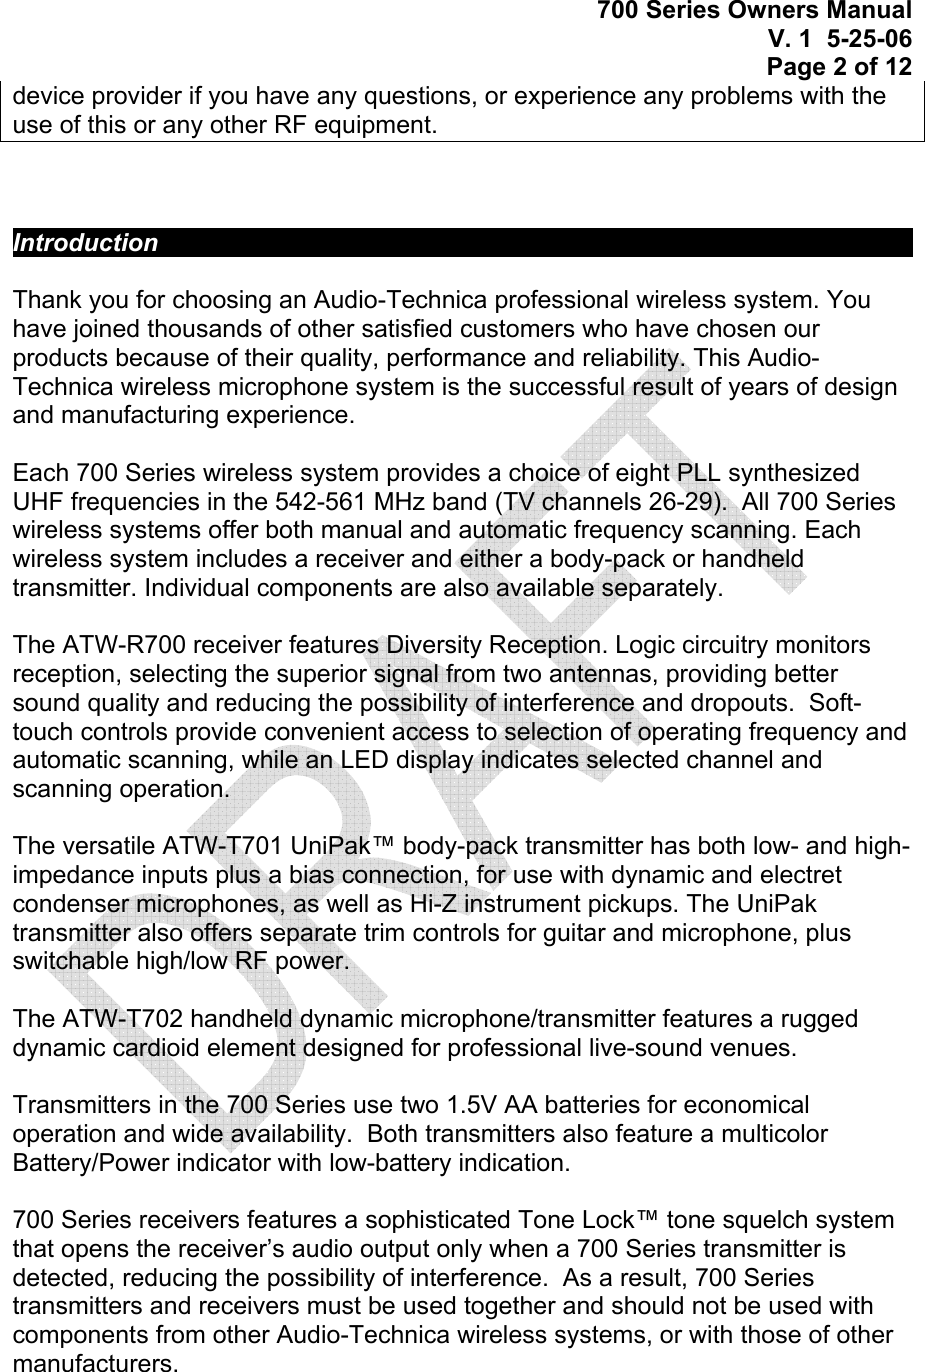 700 Series Owners Manual V. 1  5-25-06 Page 2 of 12  device provider if you have any questions, or experience any problems with the use of this or any other RF equipment.     Introduction             Thank you for choosing an Audio-Technica professional wireless system. You have joined thousands of other satisfied customers who have chosen our products because of their quality, performance and reliability. This Audio-Technica wireless microphone system is the successful result of years of design and manufacturing experience.  Each 700 Series wireless system provides a choice of eight PLL synthesized UHF frequencies in the 542-561 MHz band (TV channels 26-29).  All 700 Series wireless systems offer both manual and automatic frequency scanning. Each wireless system includes a receiver and either a body-pack or handheld transmitter. Individual components are also available separately.  The ATW-R700 receiver features Diversity Reception. Logic circuitry monitors reception, selecting the superior signal from two antennas, providing better sound quality and reducing the possibility of interference and dropouts.  Soft-touch controls provide convenient access to selection of operating frequency and automatic scanning, while an LED display indicates selected channel and scanning operation.   The versatile ATW-T701 UniPak™ body-pack transmitter has both low- and high-impedance inputs plus a bias connection, for use with dynamic and electret condenser microphones, as well as Hi-Z instrument pickups. The UniPak transmitter also offers separate trim controls for guitar and microphone, plus switchable high/low RF power.  The ATW-T702 handheld dynamic microphone/transmitter features a rugged dynamic cardioid element designed for professional live-sound venues.  Transmitters in the 700 Series use two 1.5V AA batteries for economical operation and wide availability.  Both transmitters also feature a multicolor Battery/Power indicator with low-battery indication.     700 Series receivers features a sophisticated Tone Lock™ tone squelch system that opens the receiver’s audio output only when a 700 Series transmitter is detected, reducing the possibility of interference.  As a result, 700 Series transmitters and receivers must be used together and should not be used with components from other Audio-Technica wireless systems, or with those of other manufacturers.     